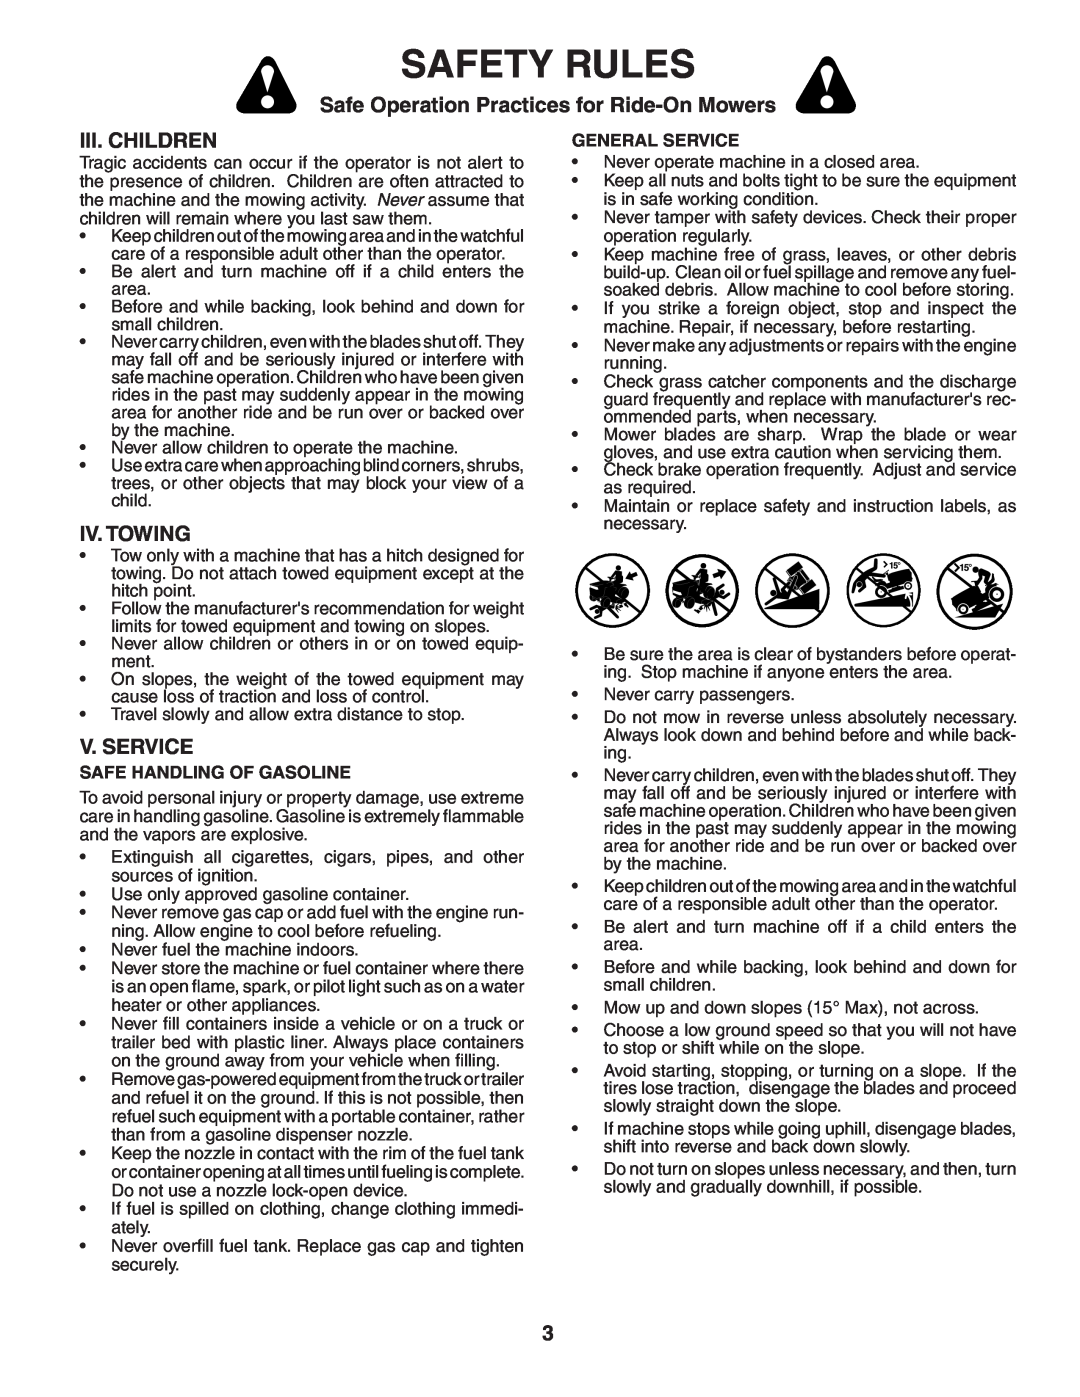 Poulan 404489 manual Iii. Children, Iv. Towing, V. Service, Safety Rules, Safe Operation Practices for Ride-On Mowers 